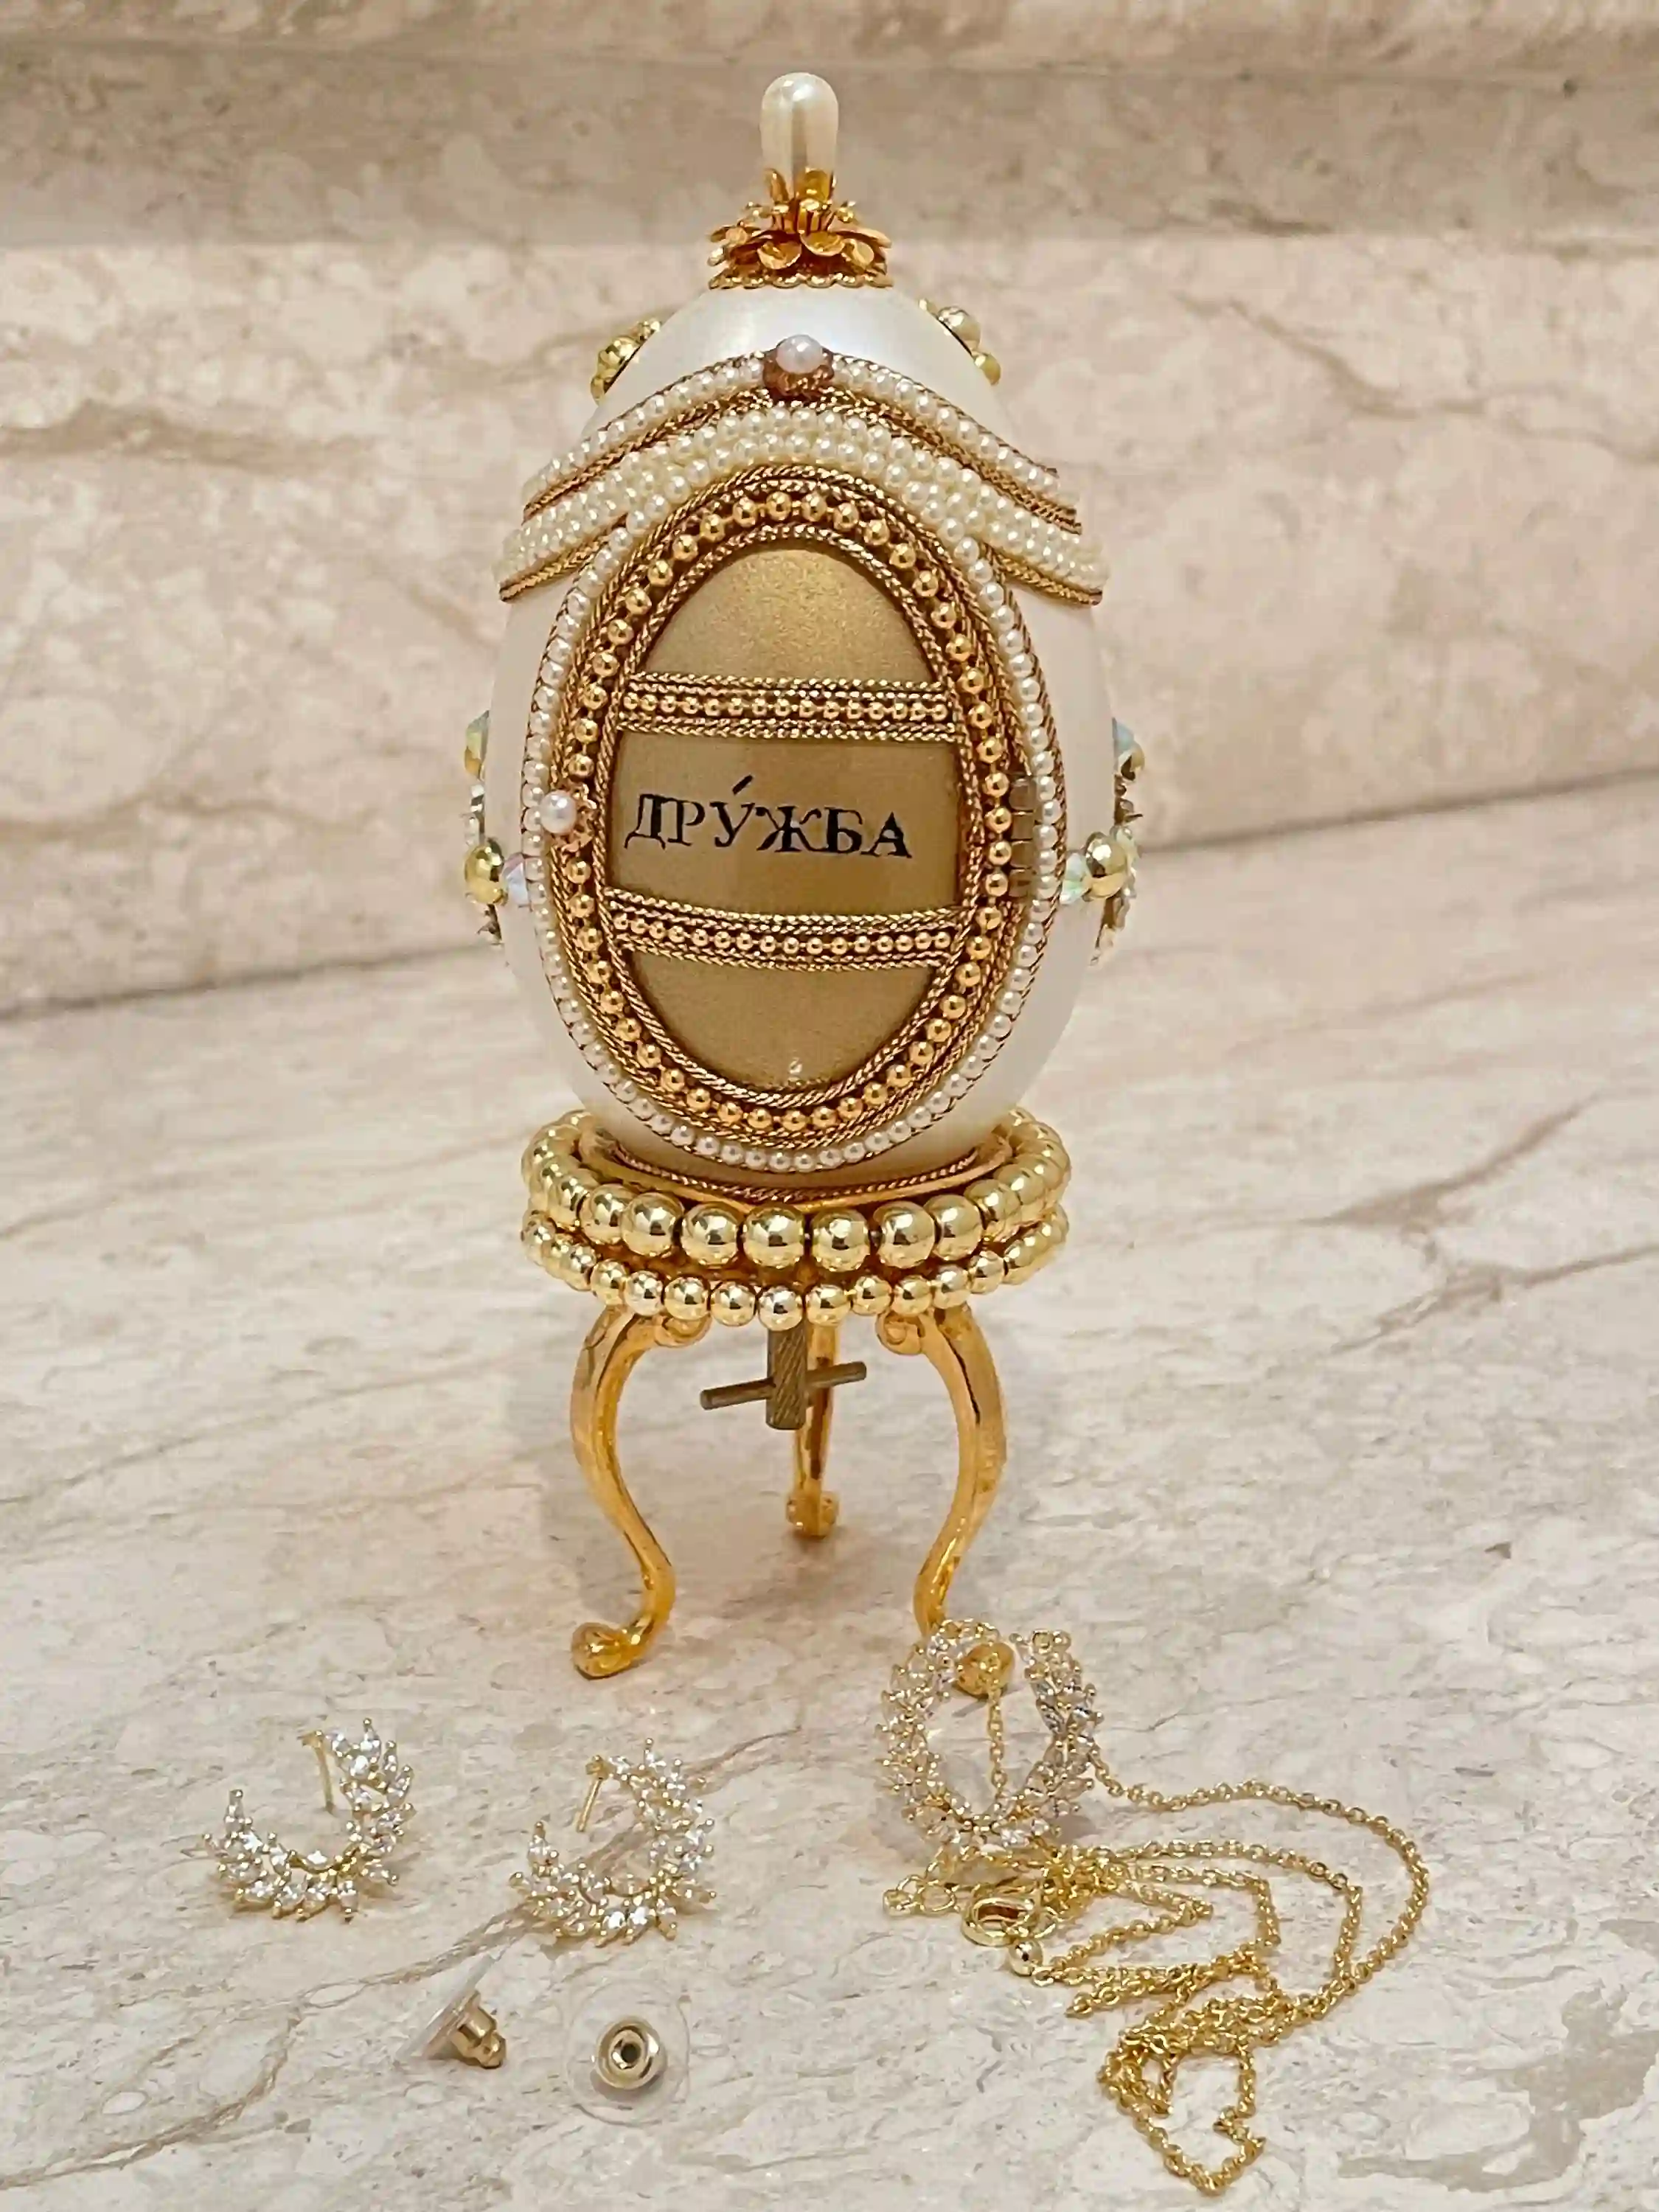 ONE Of A KIND Faberge Egg Jewelry Box Daughter Wedding Day Gifts Collectible Item Swarovski Handset Faberge Egg style Natural HANDCARVED Egg 